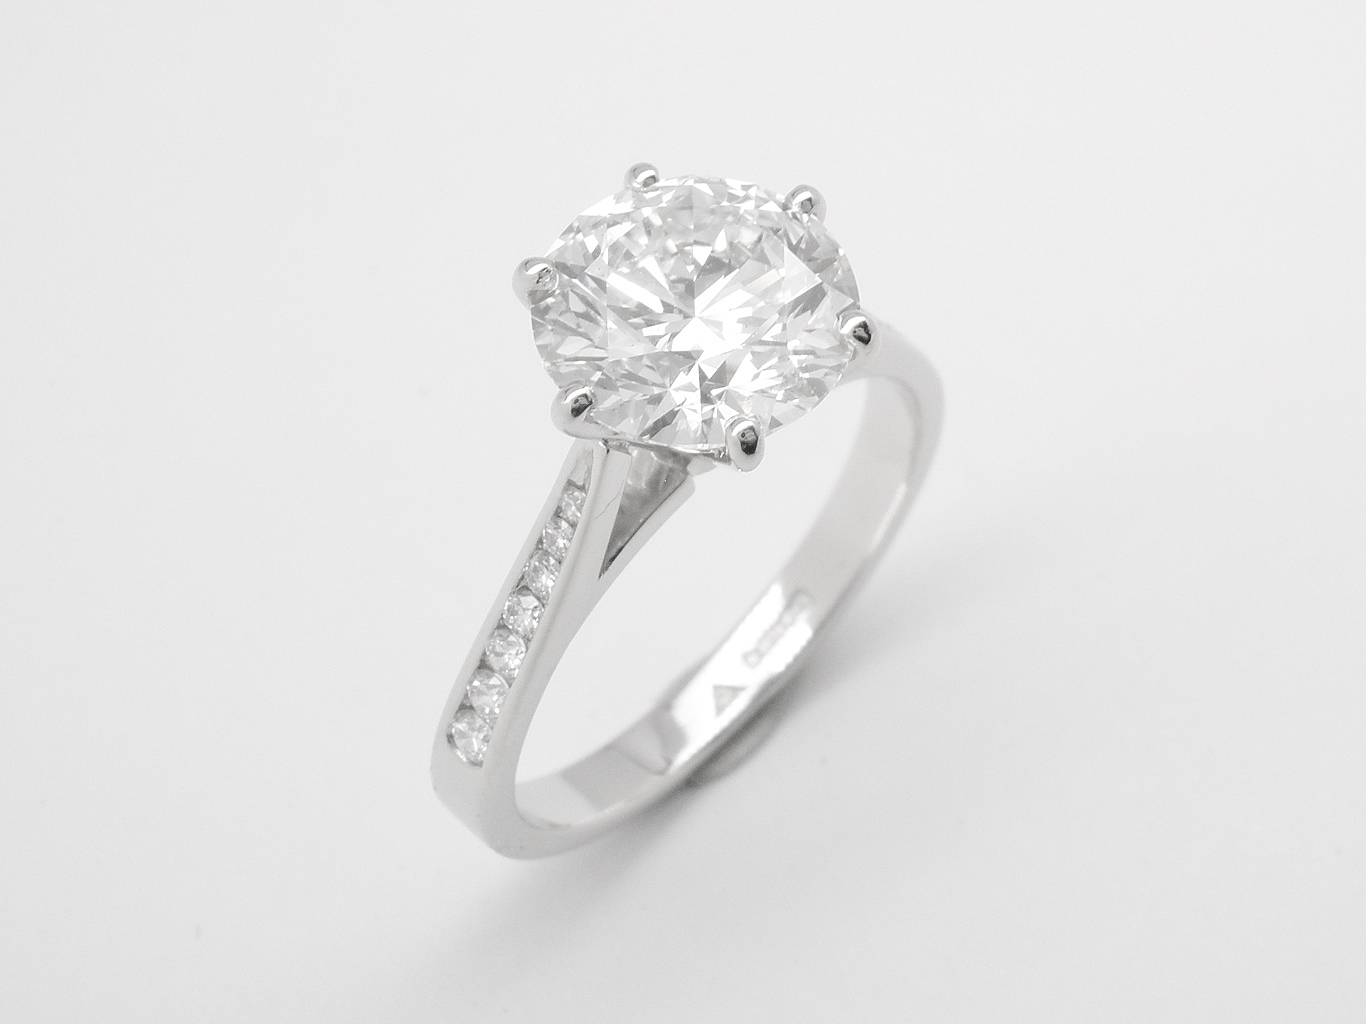 A 2.26cts round brilliant cut diamond ring mounted in platinum with 7 round brilliant cut diamonds that taper in size channel set in each shoulder.